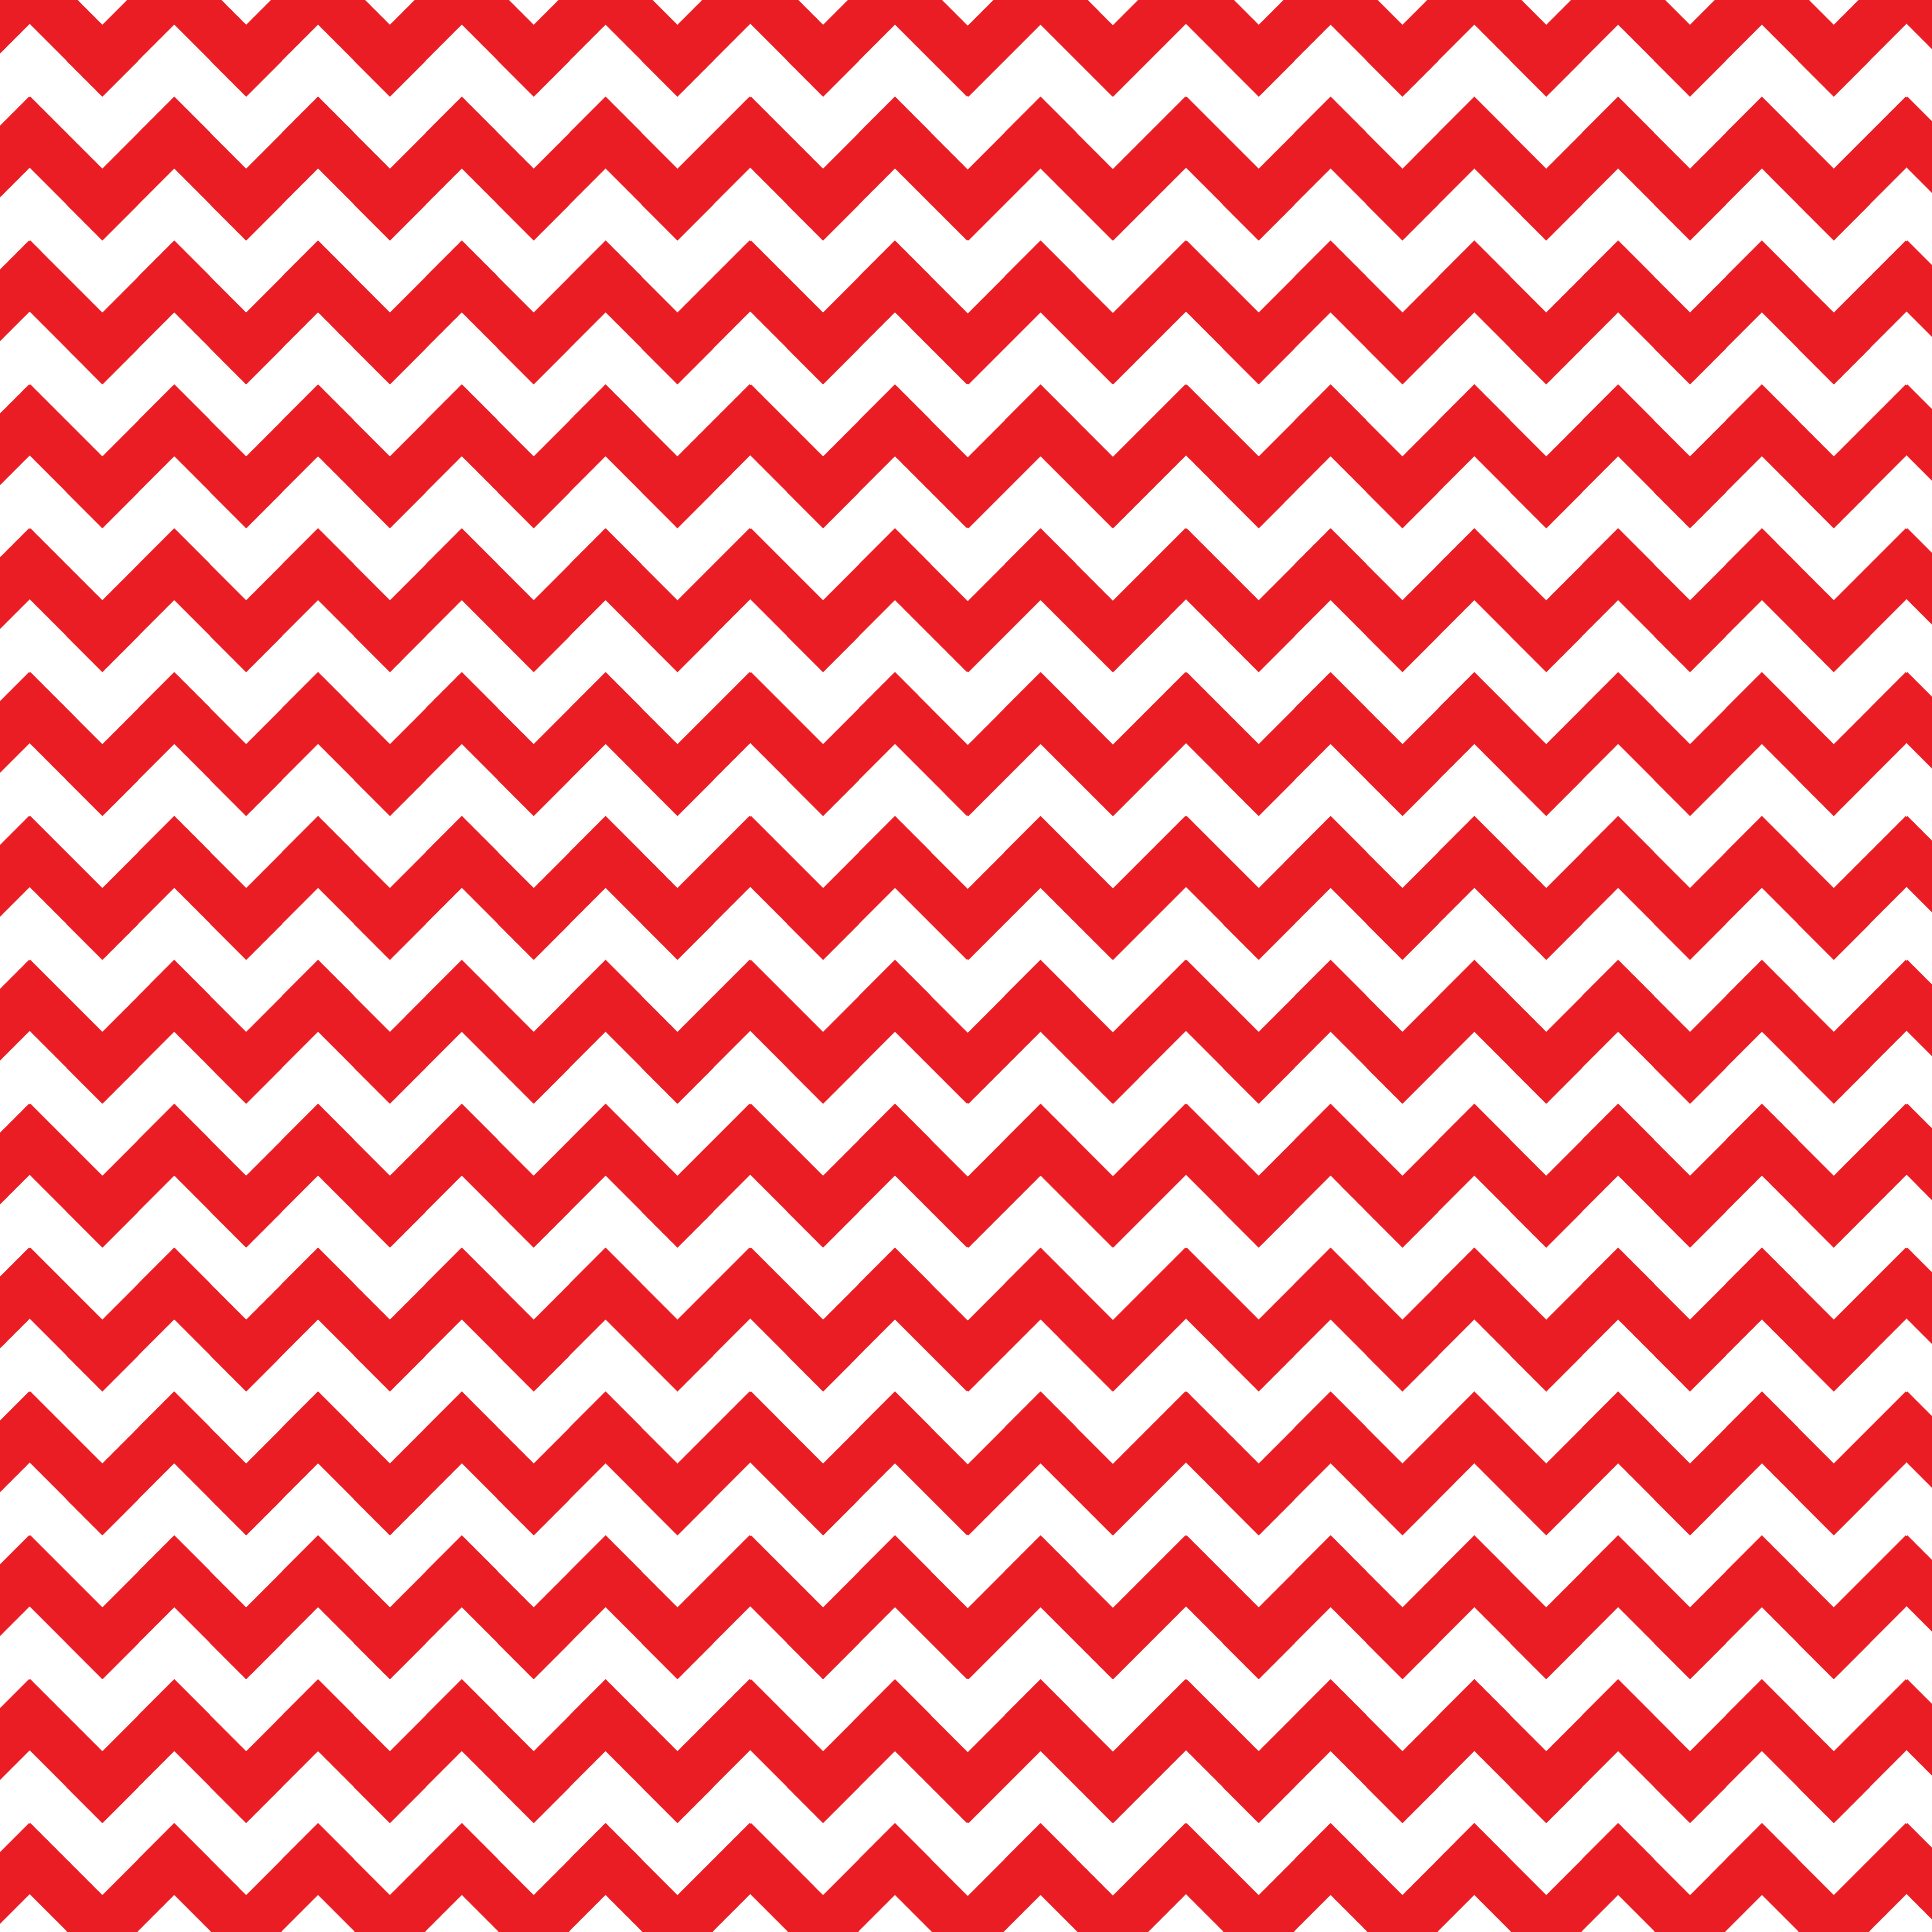 16 Chevron Print Free Cliparts That You Can Download To You Computer